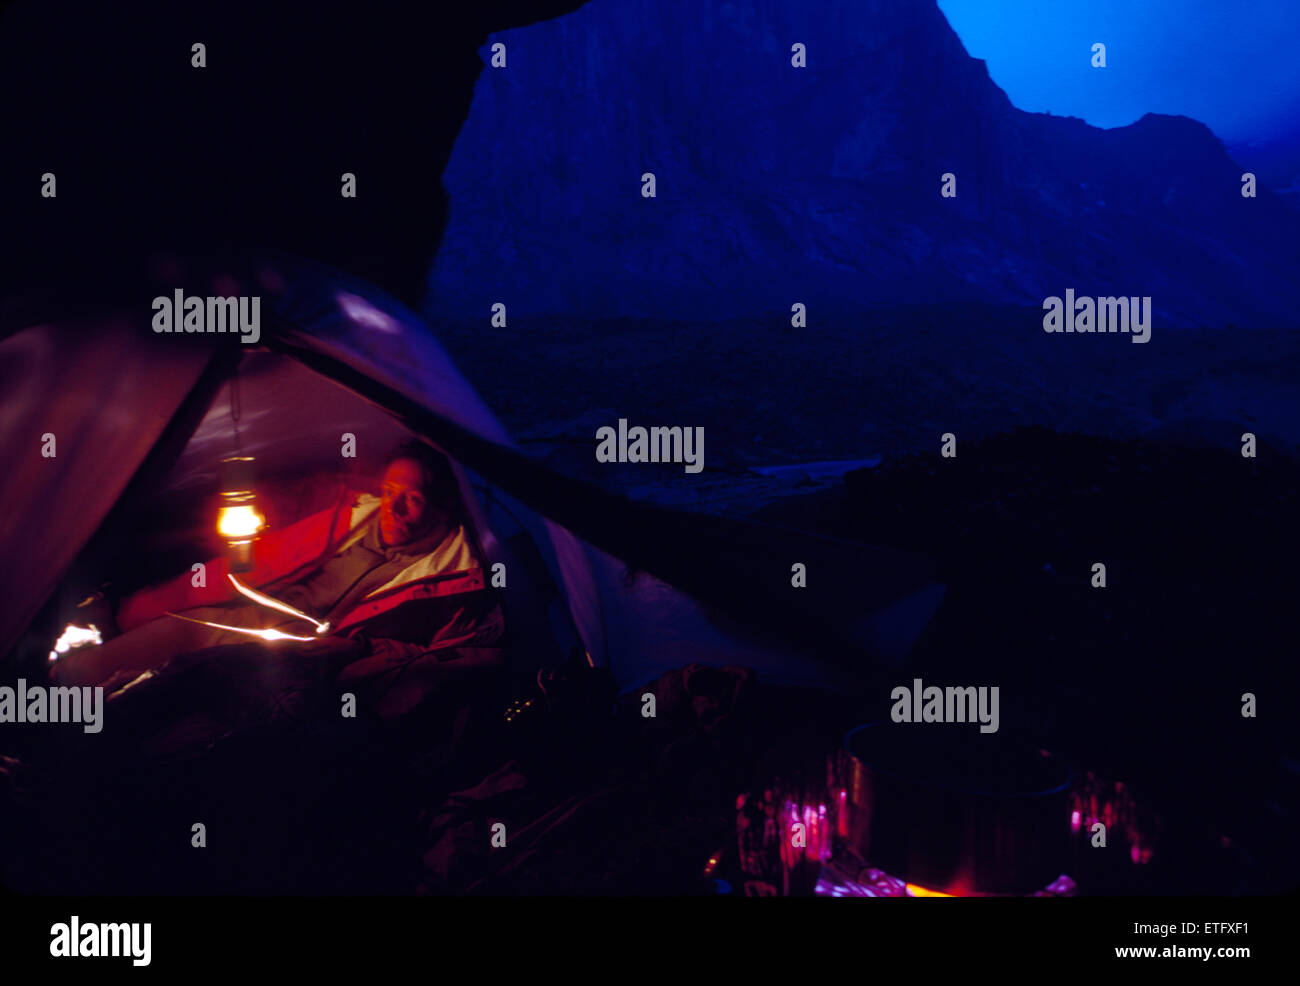 Night view of male backpacker camped in tent, Auyuittuq National Park, Baffin Island, Nunavut, Canada Stock Photo